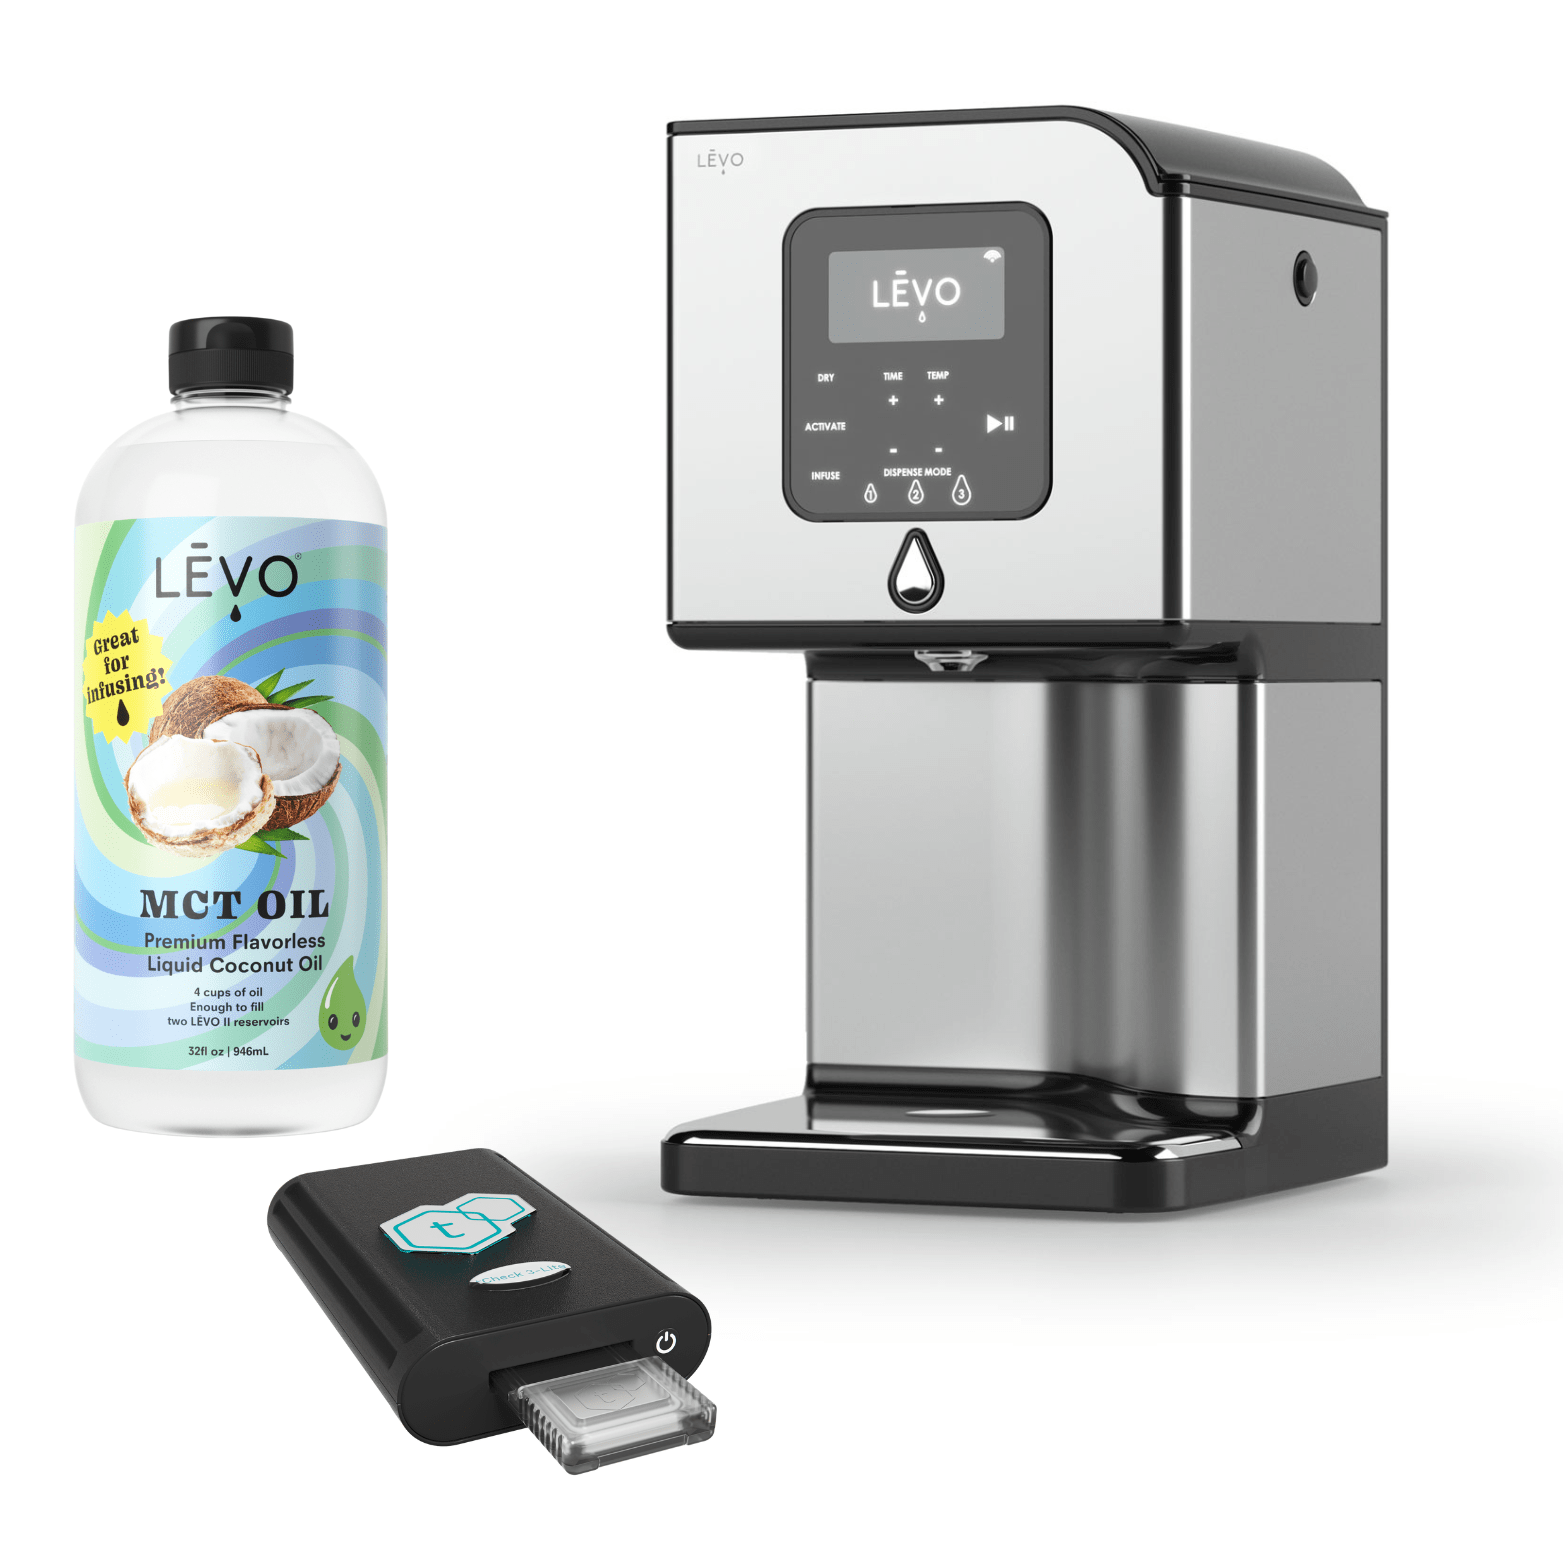 LEVO Lux oil infuser with tCheck 3 potency testing device and LEVO MCT Oil. LĒVO Lux x tCheck Potency Tester Bundle: Infuse and test with precision.